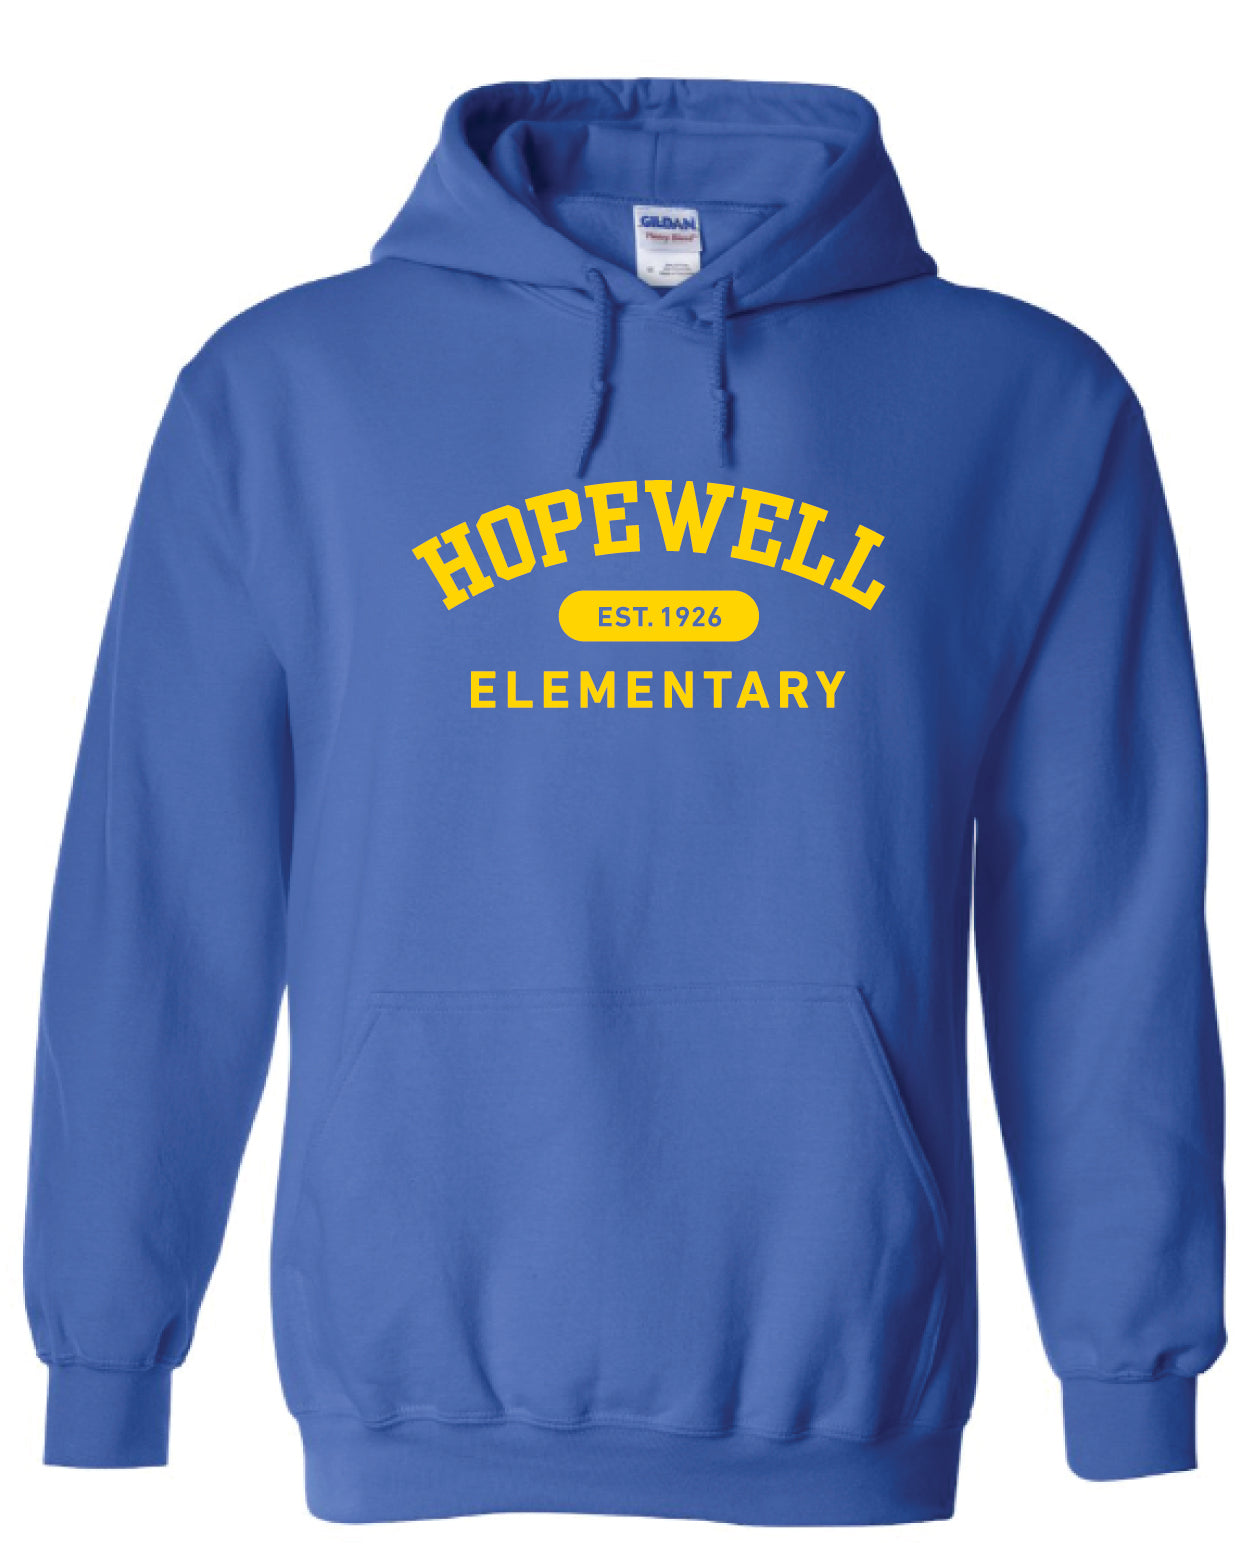 Hopewell Elementary Blue Hoodie - Adult and Youth